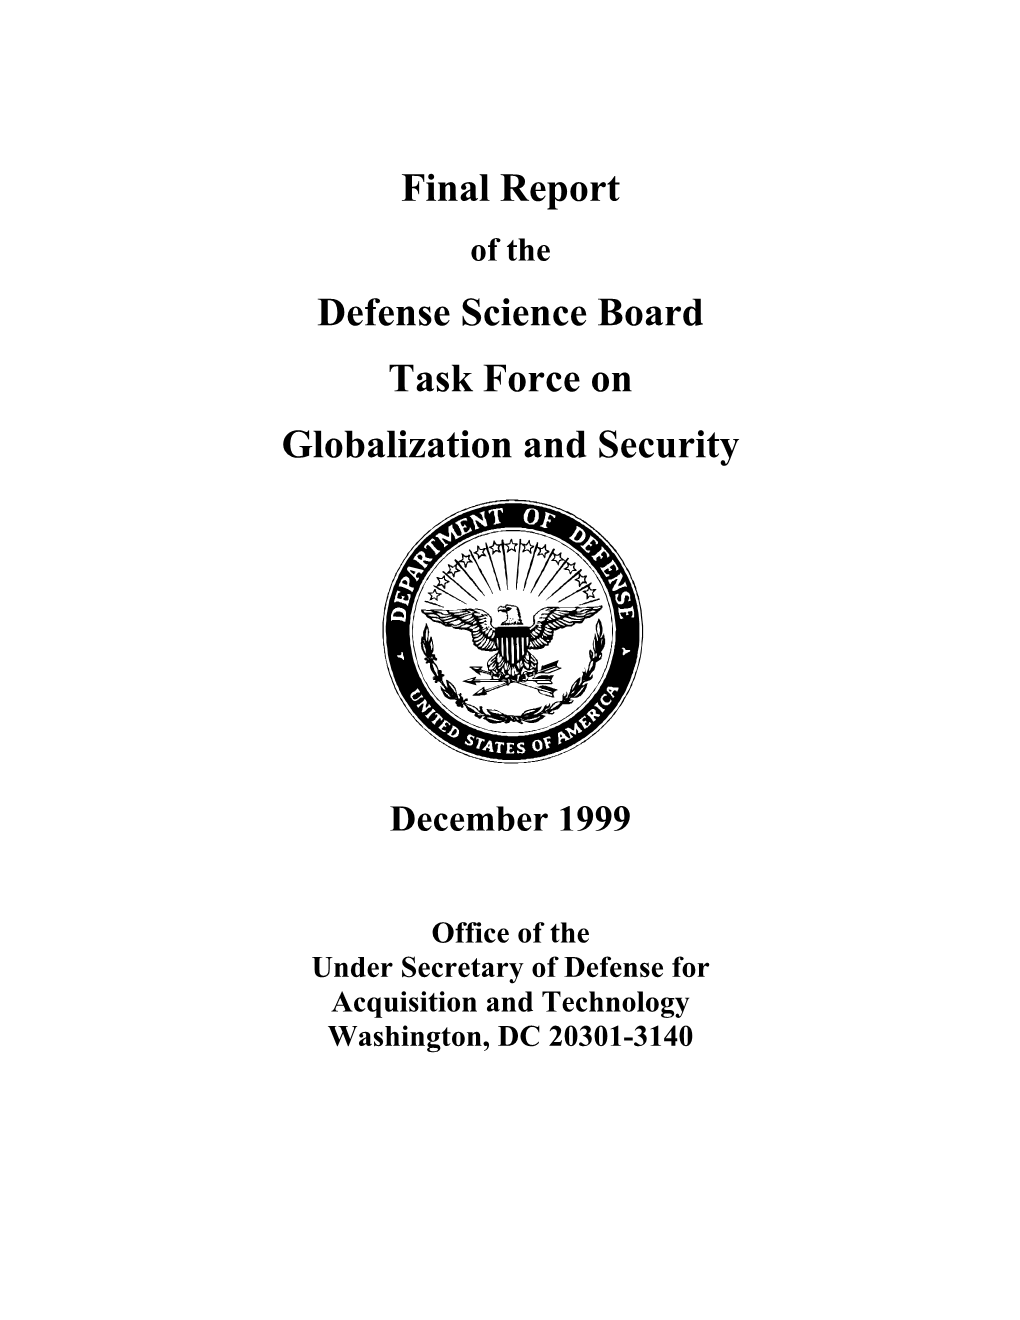 Final Report Defense Science Board Task Force on Globalization And